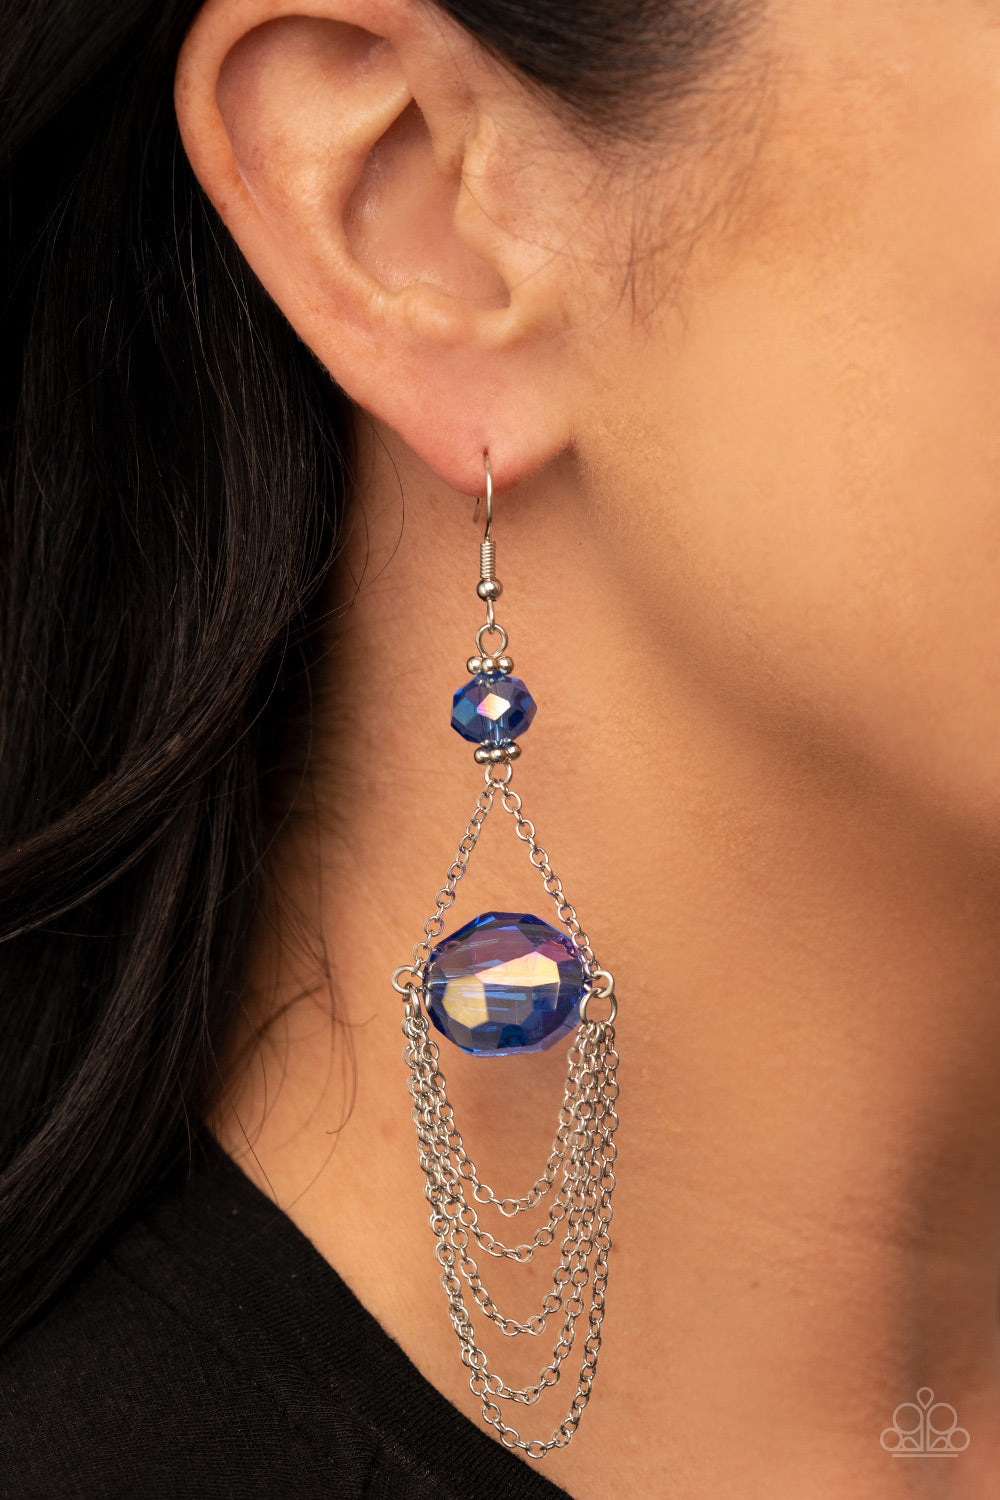 Paparazzi Ethereally Extravagant - Blue Iridescent Earrings. #P5RE-BLXX-259XX. Free Shipping!